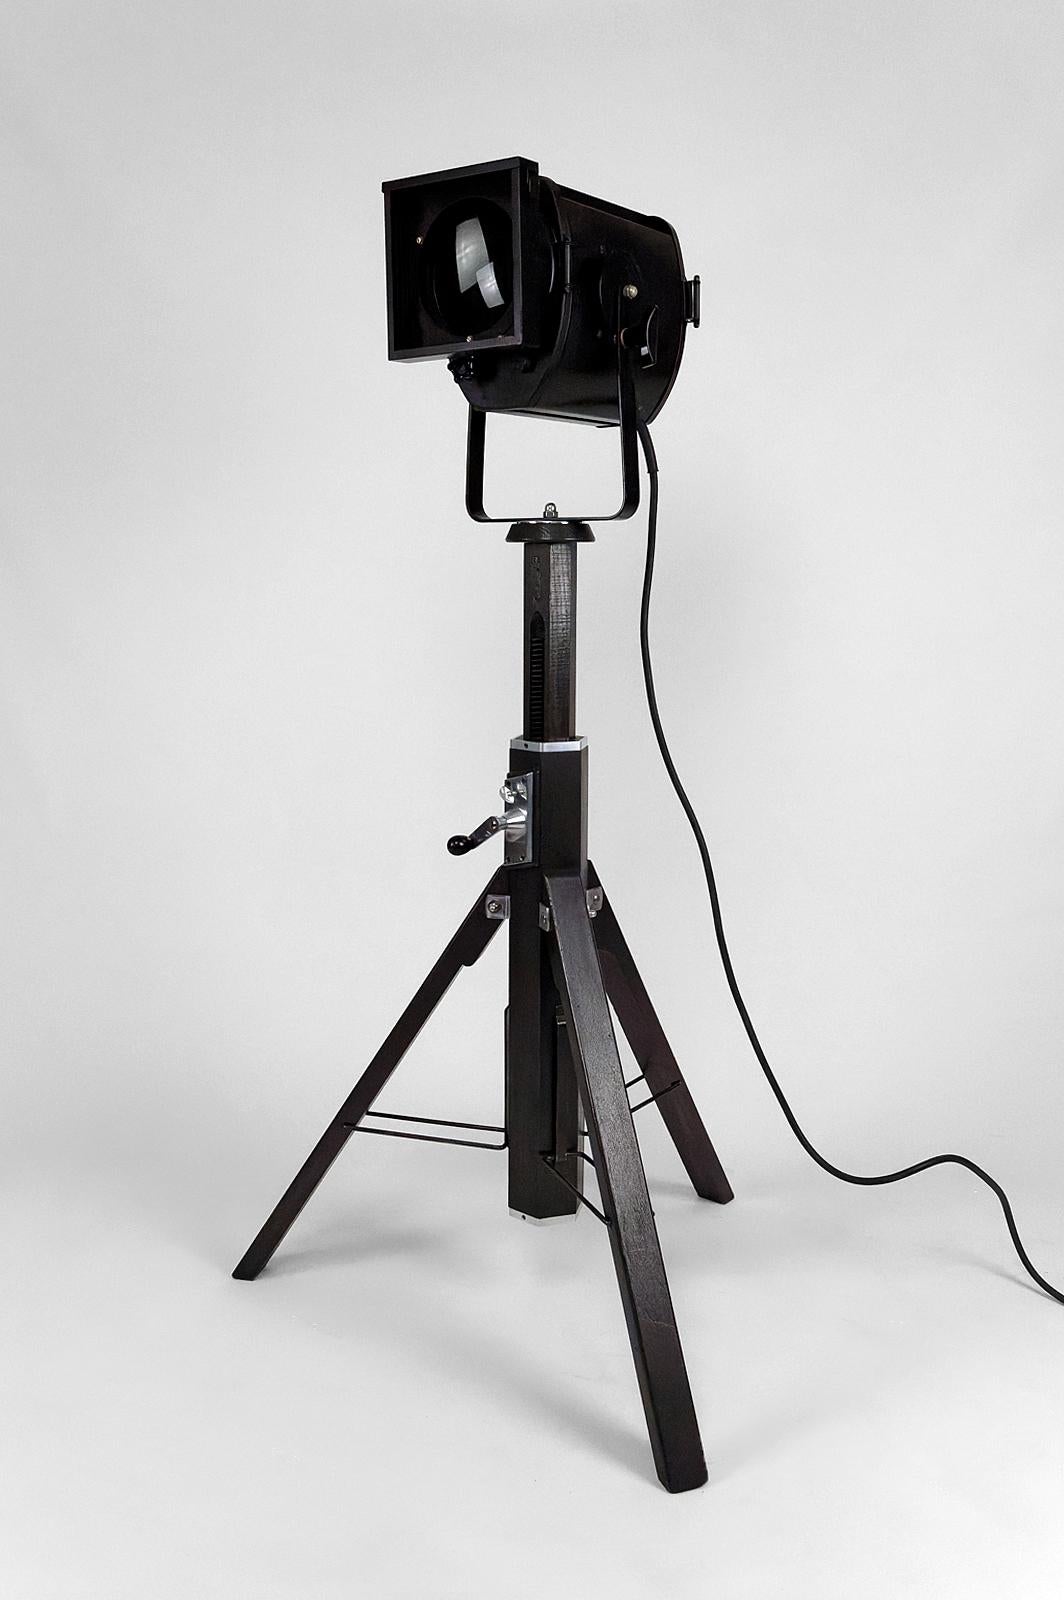 Superb cinema projector and tripod.

Spotlight with wooden transport box.
Height adjustable foot.

In very good condition, restored.

Box dimensions: 50 x 30 x 30 cm
Foot dimensions (folded): height 90 cm, diameter 30 cm

Total assembled